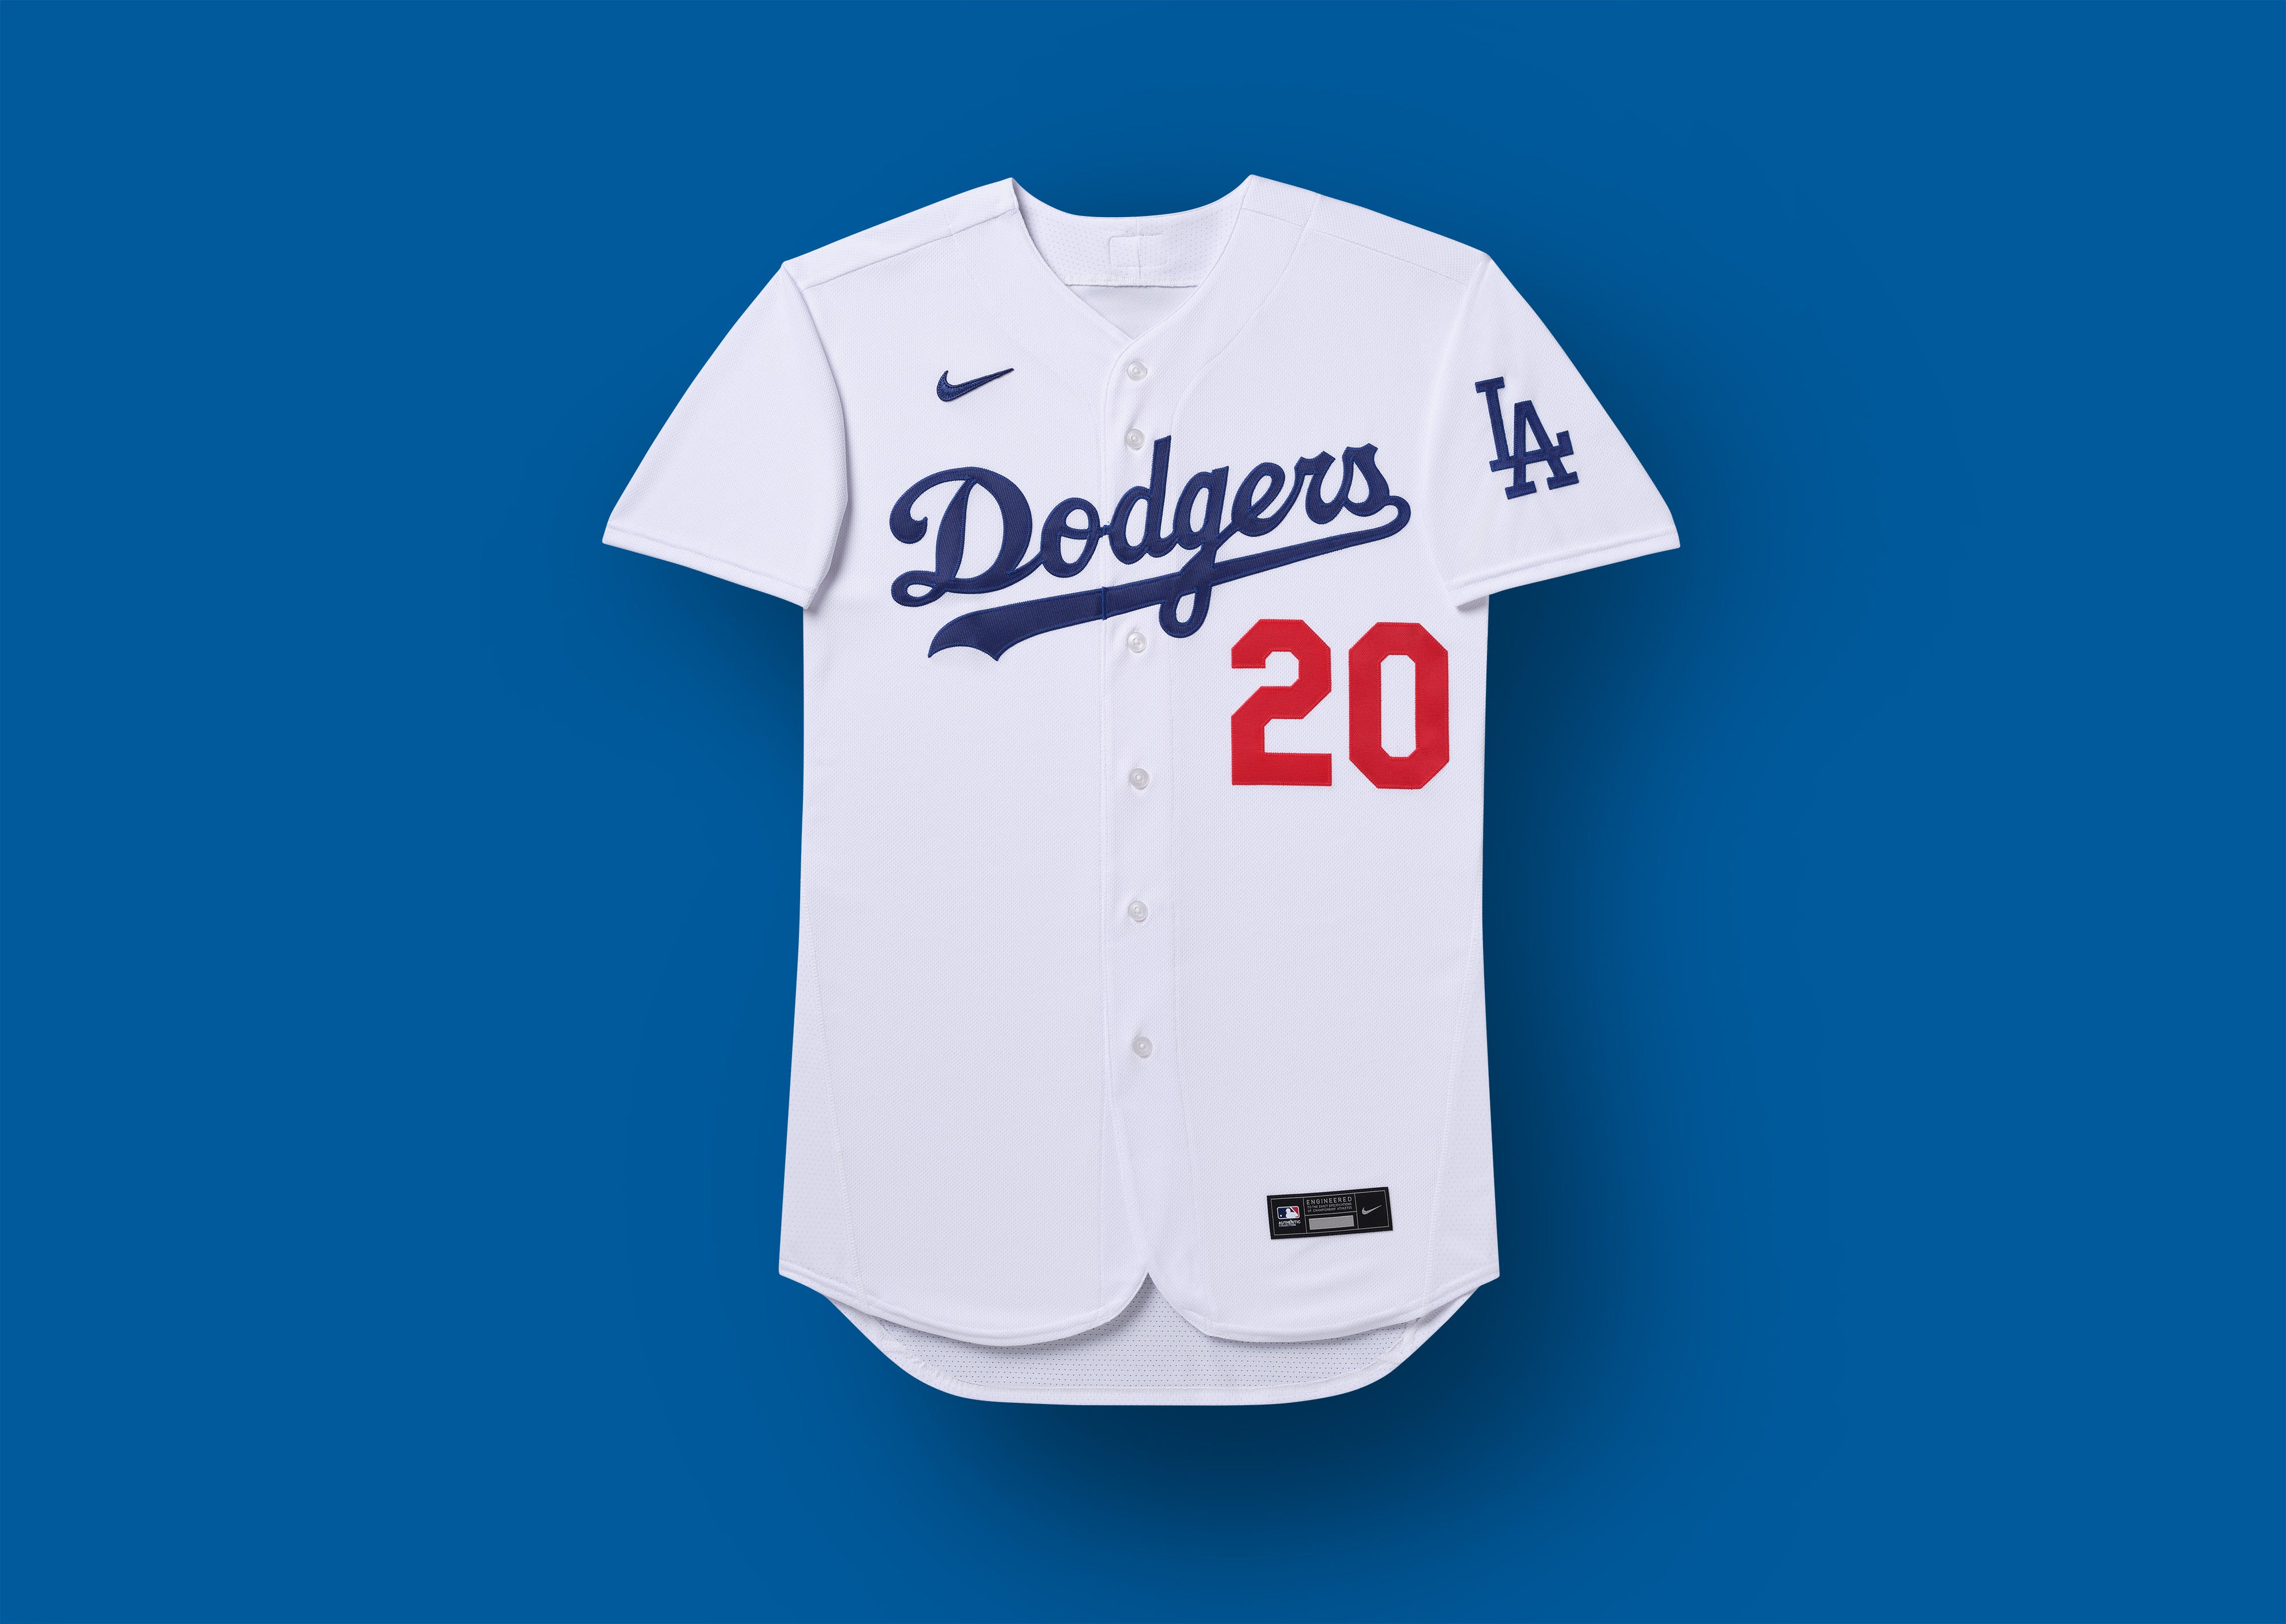 Nike unveils new MLB jerseys for 2020 